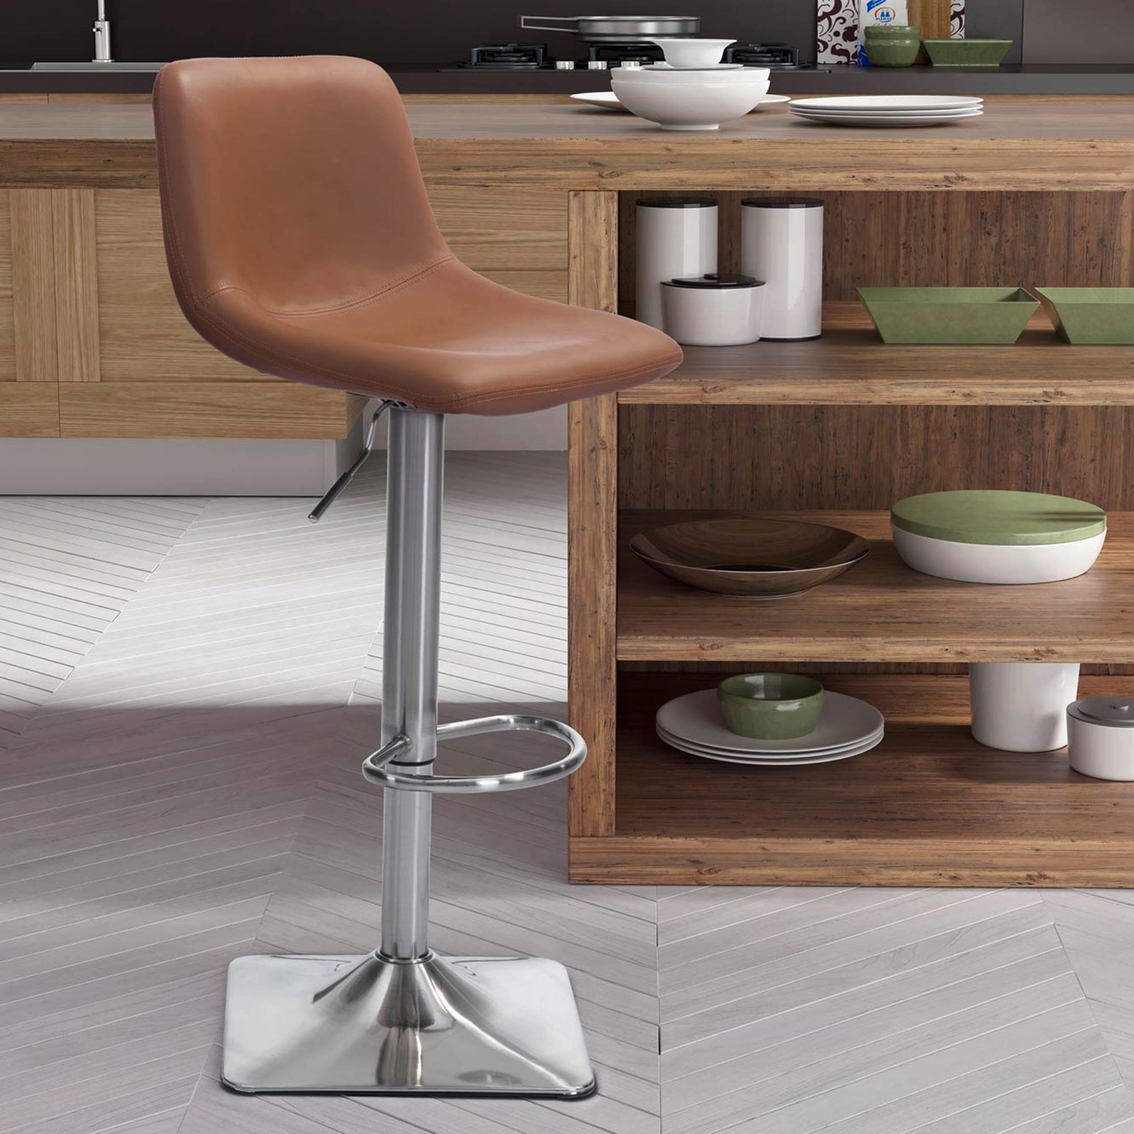 Zuo Modern Cougar Bar Chair - Image 4 of 4